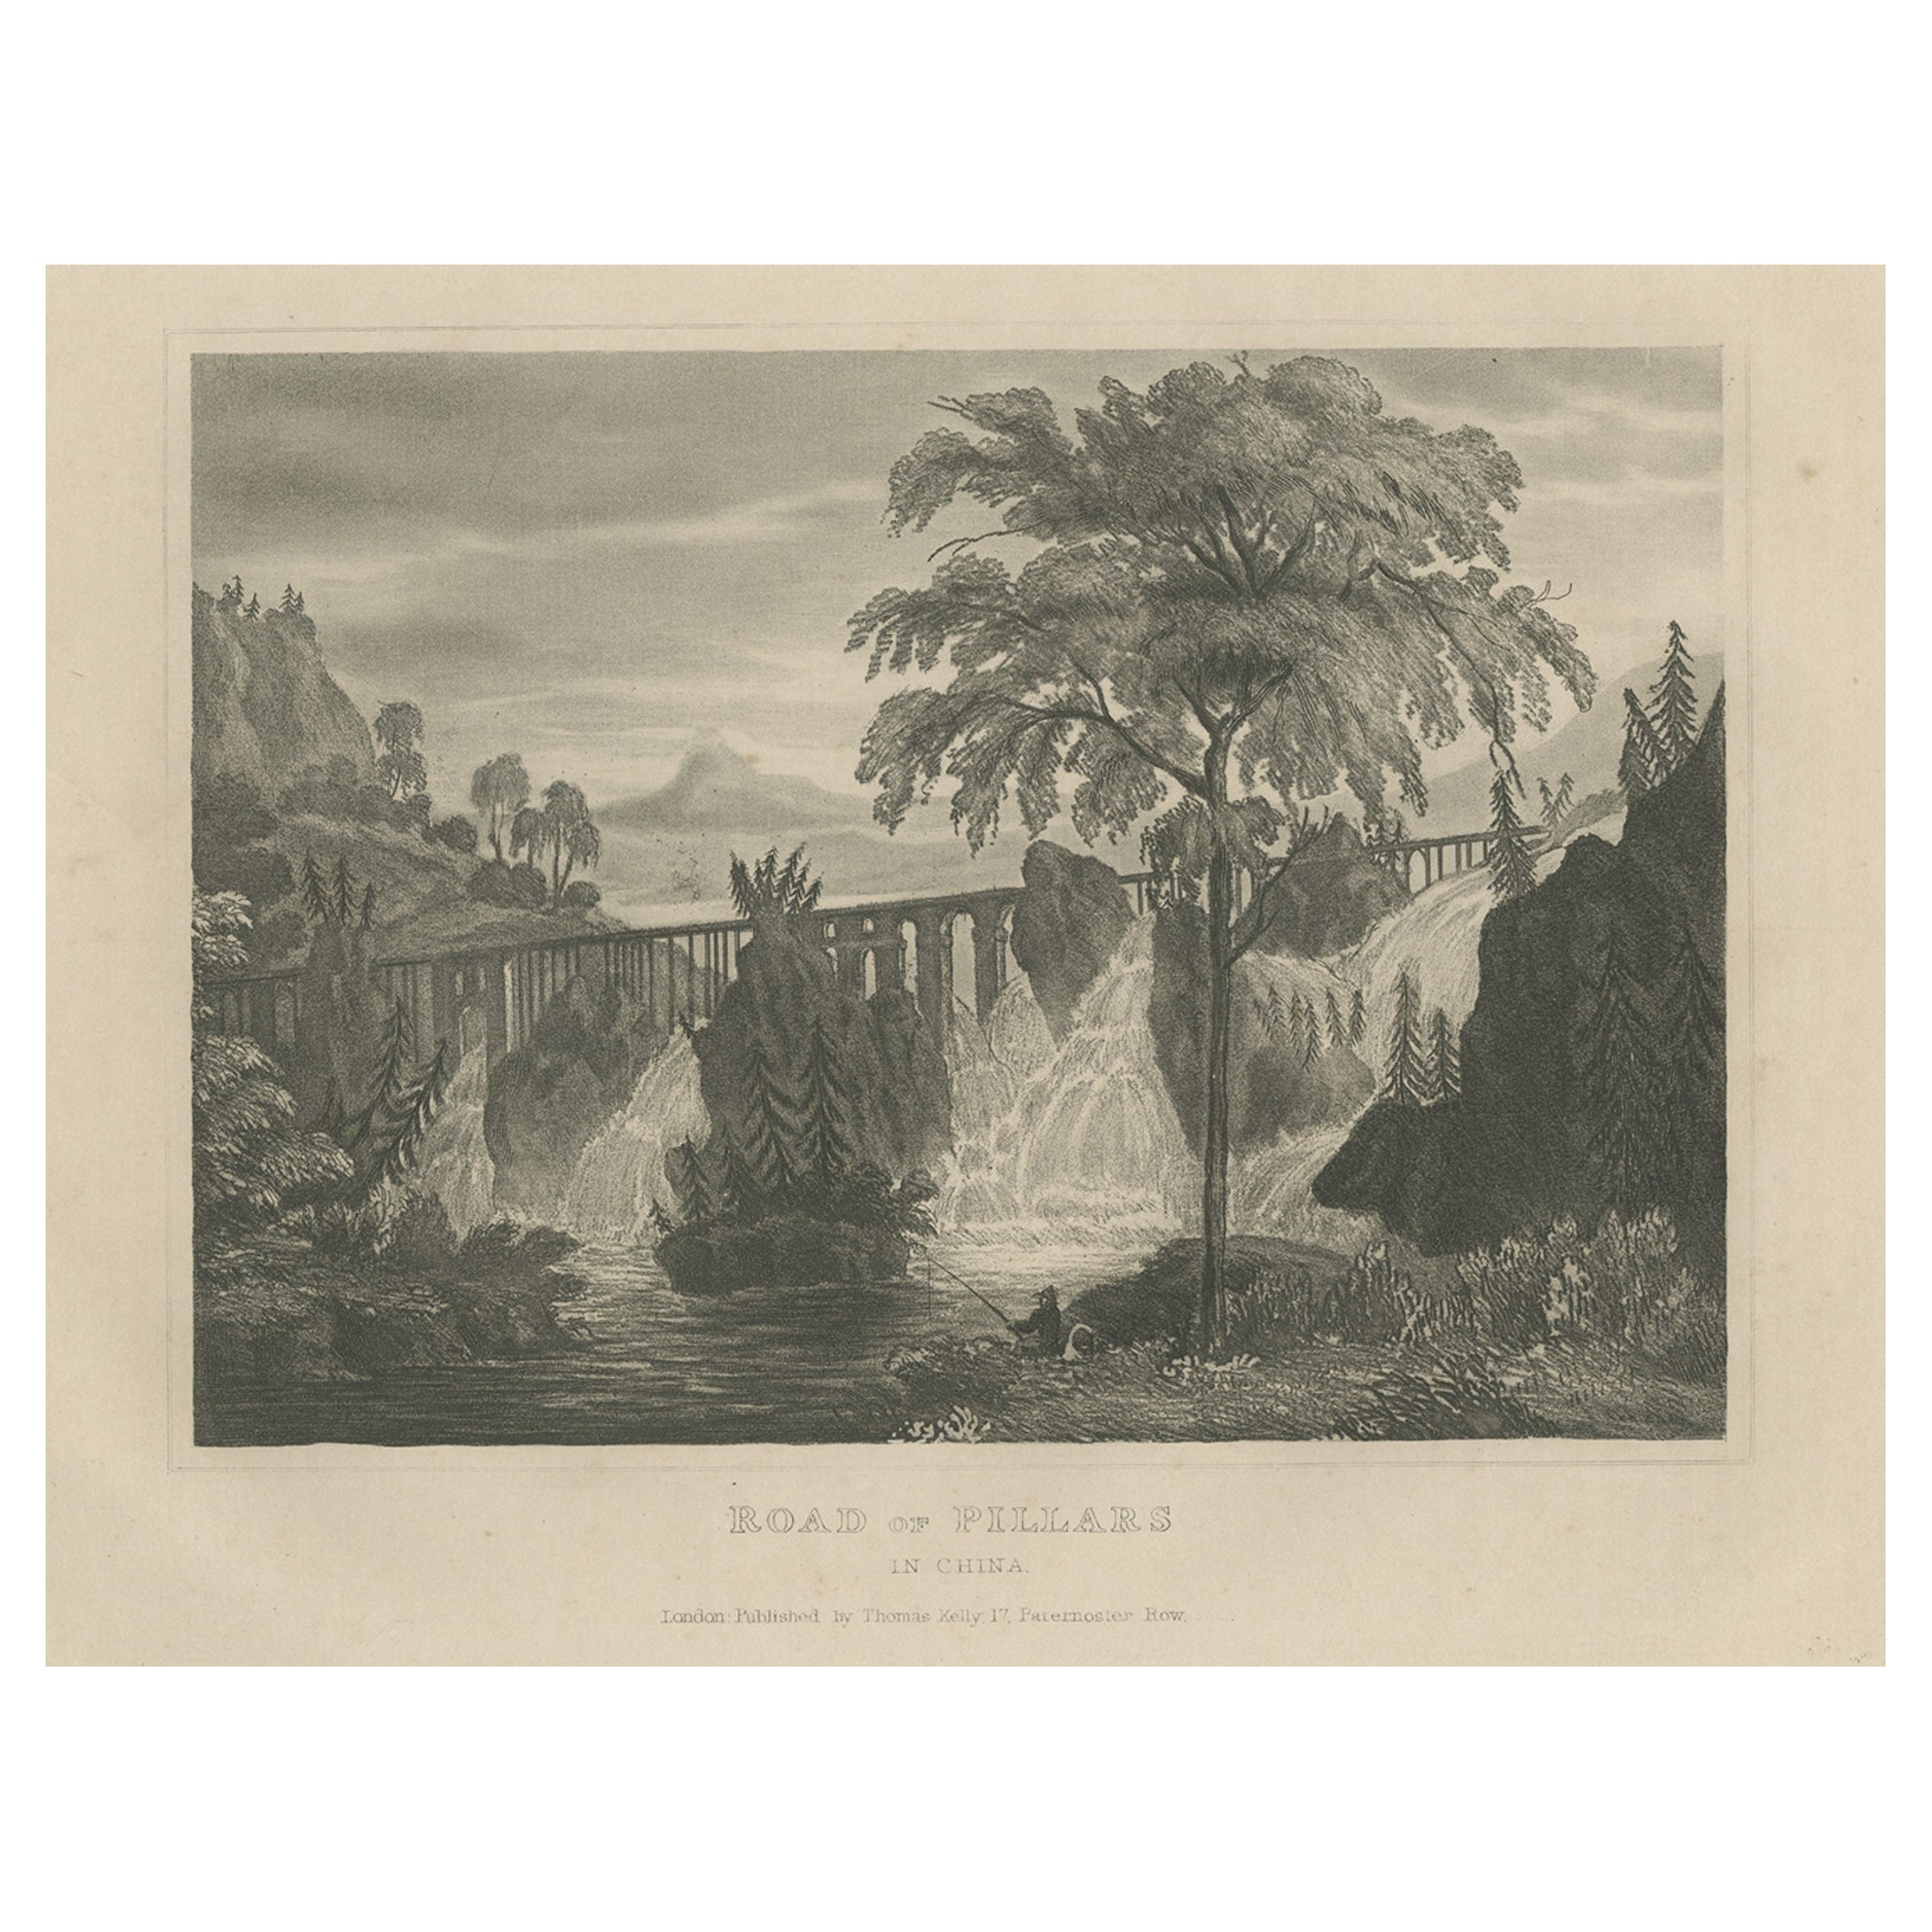 Antique Print of the Road of Pillars in China, ca.1850 For Sale